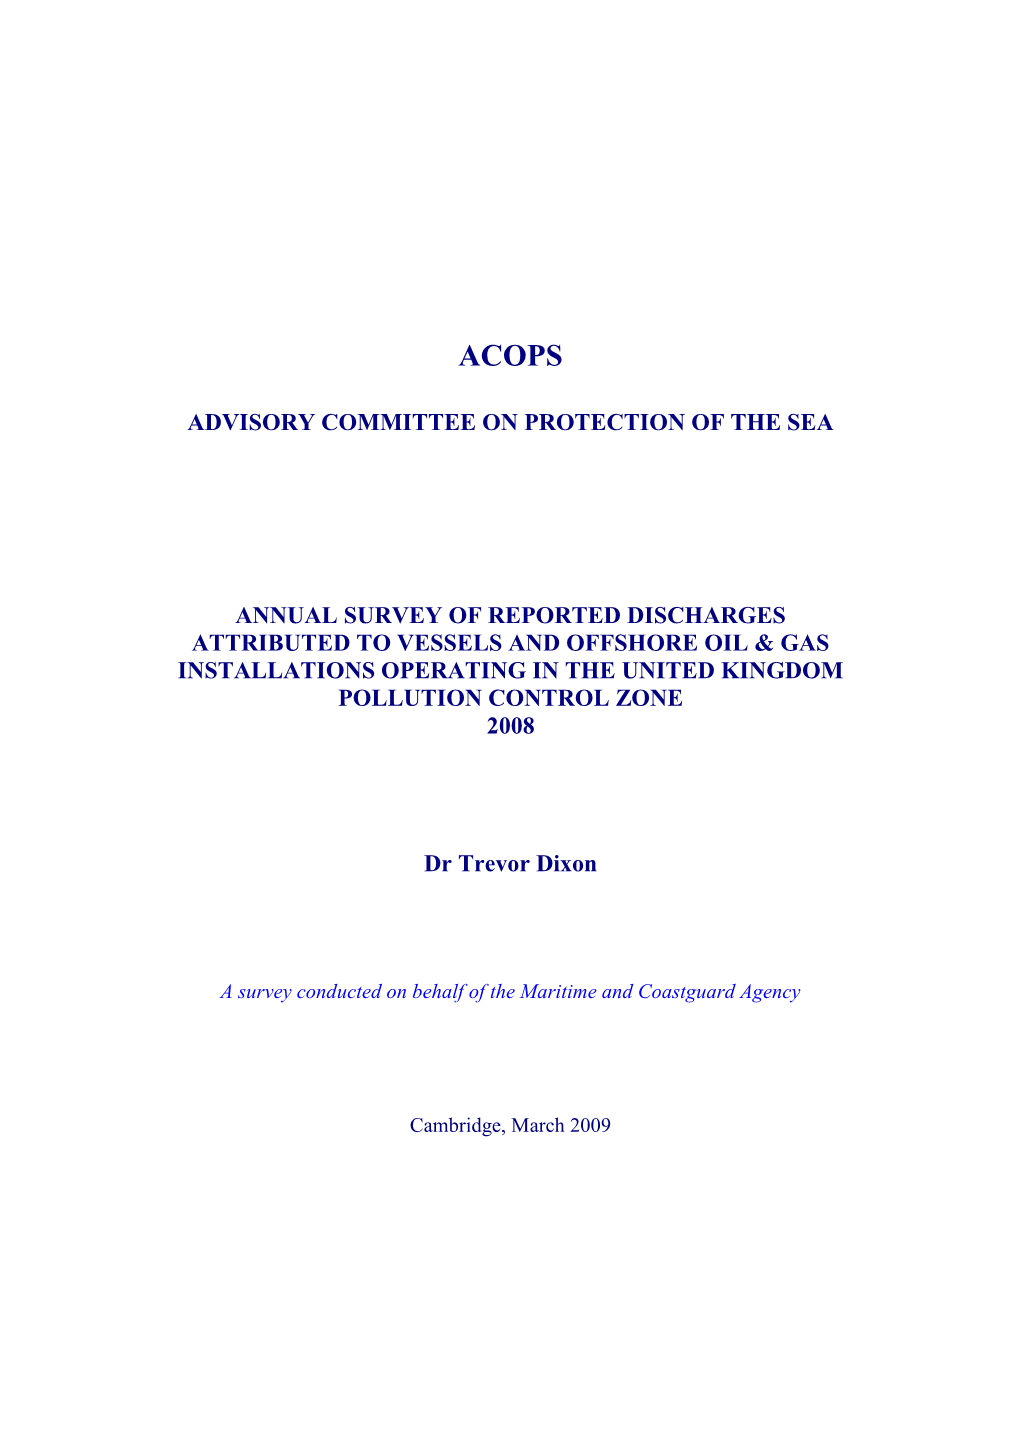 Advisory Committee on Protection of the Sea